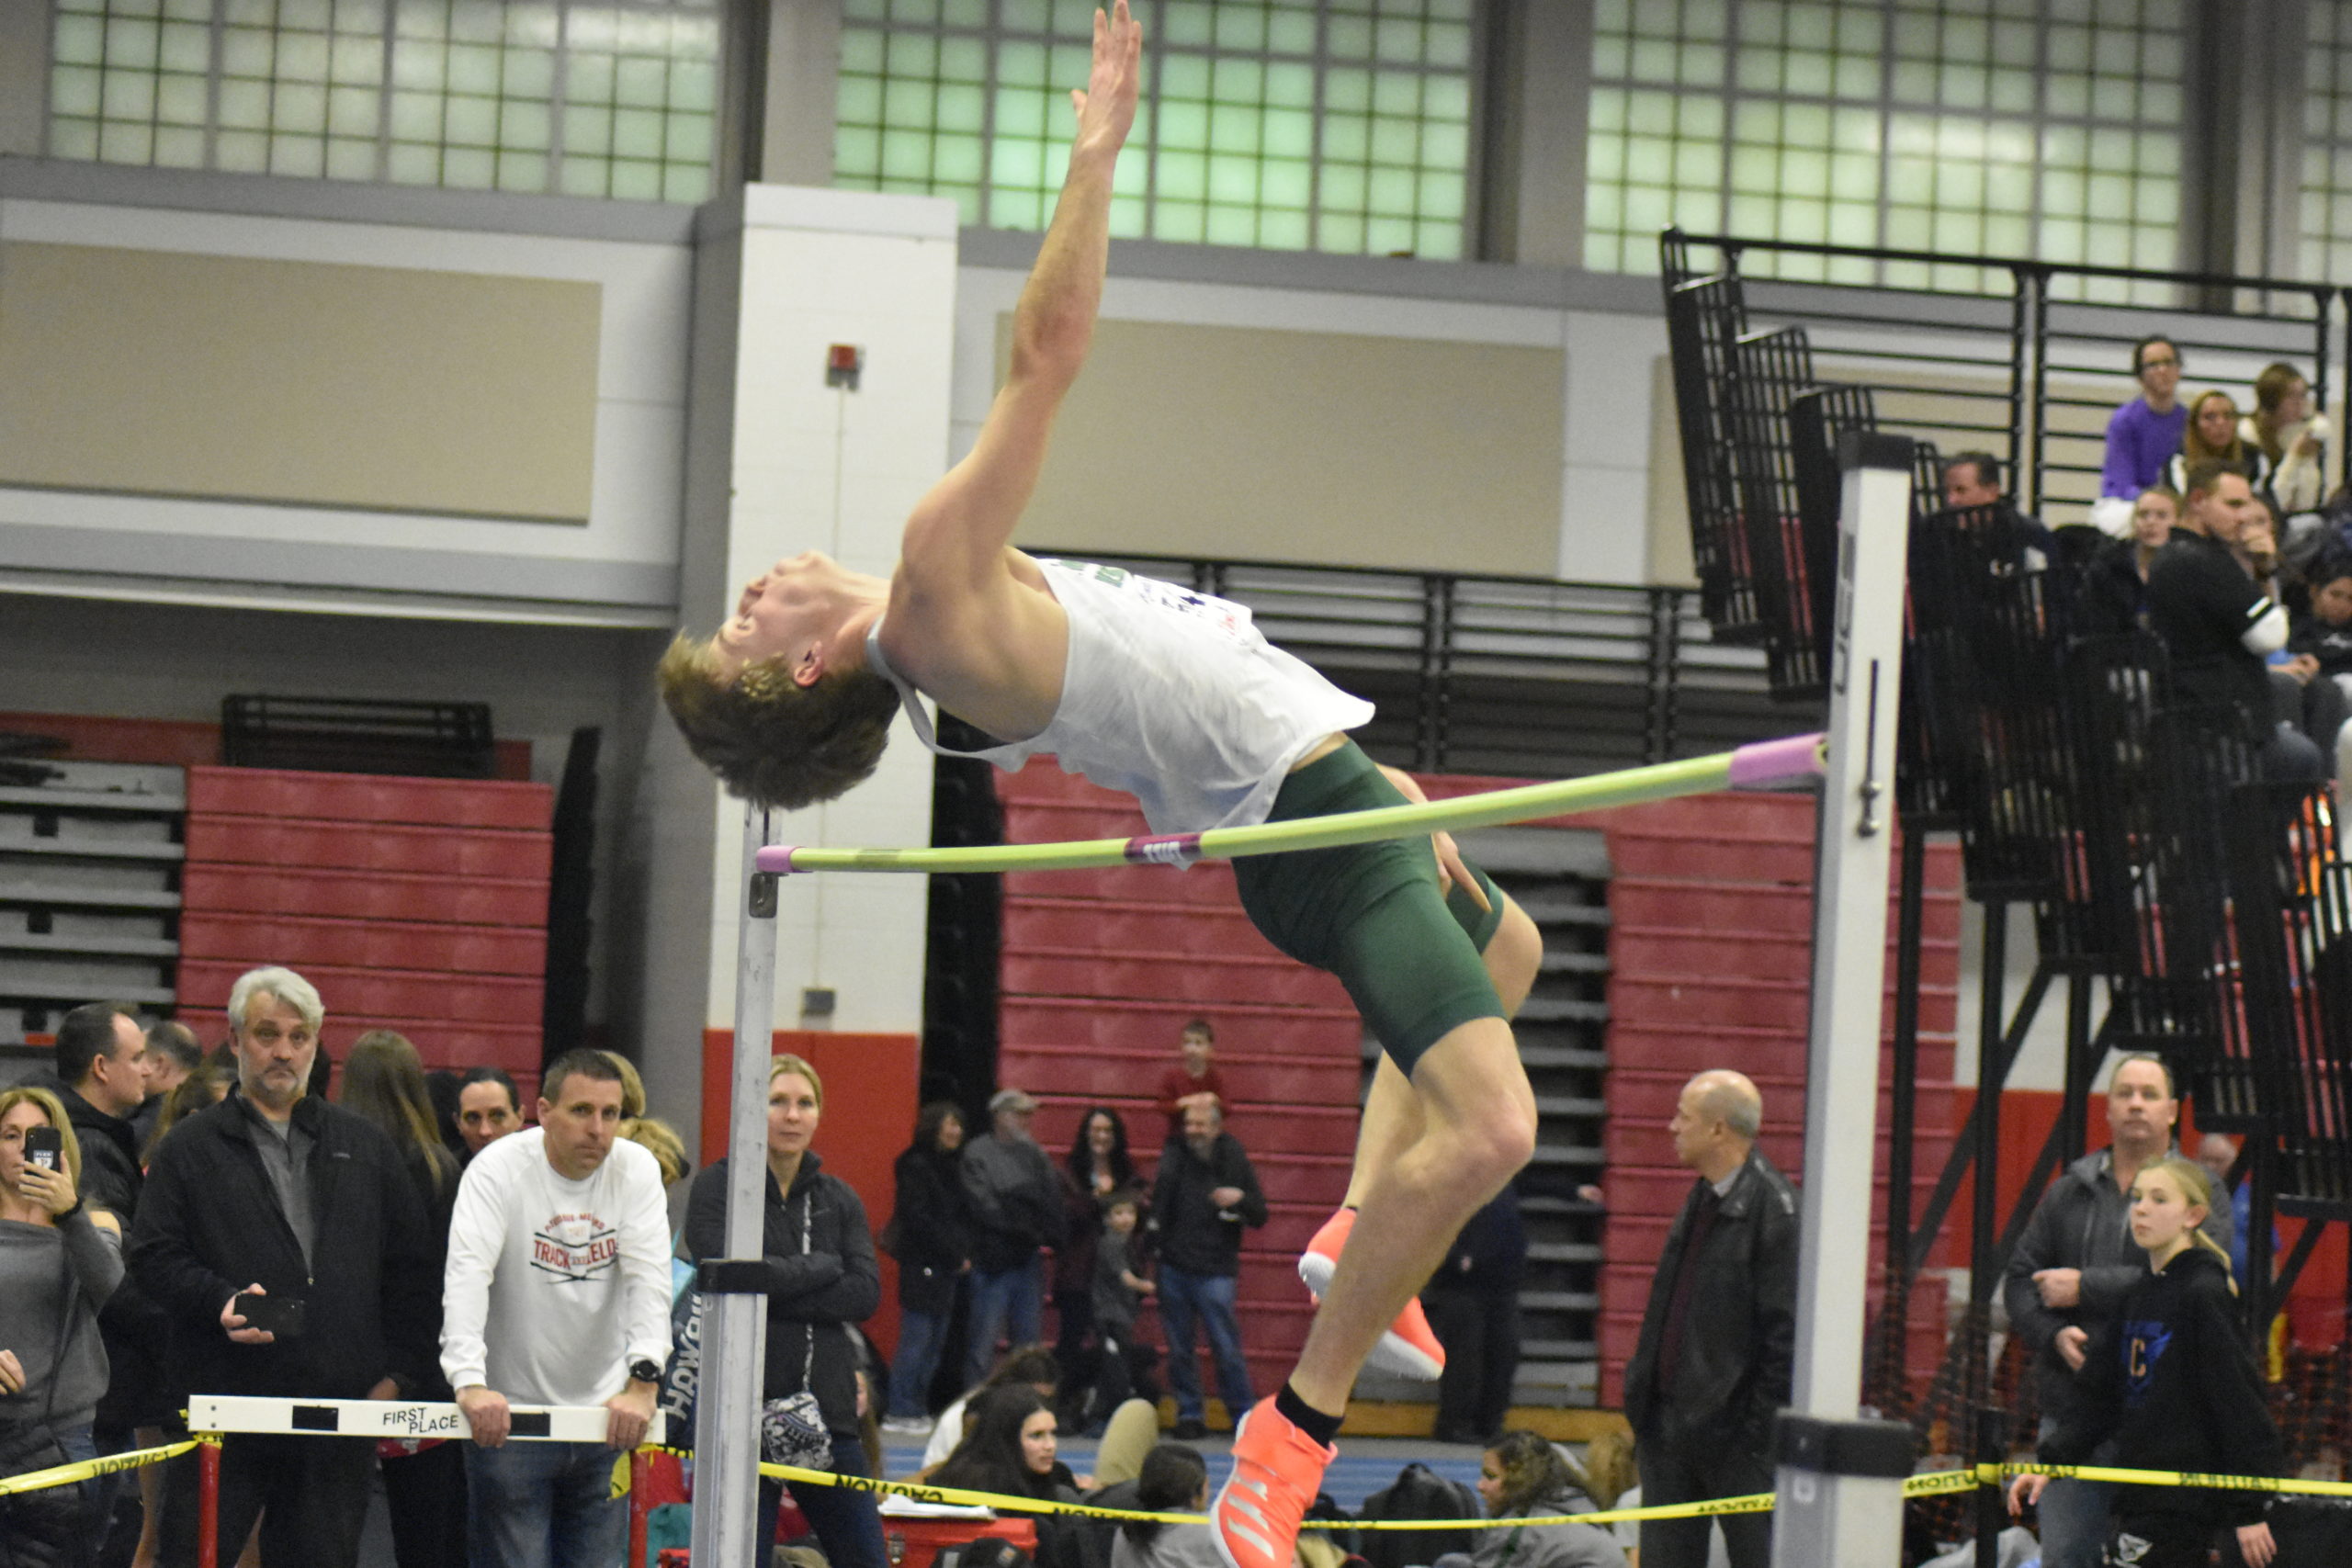 Westhampton Beach senior Jack Meigel placed second in the county in the high jump and qualified for states.  DREW BUDD